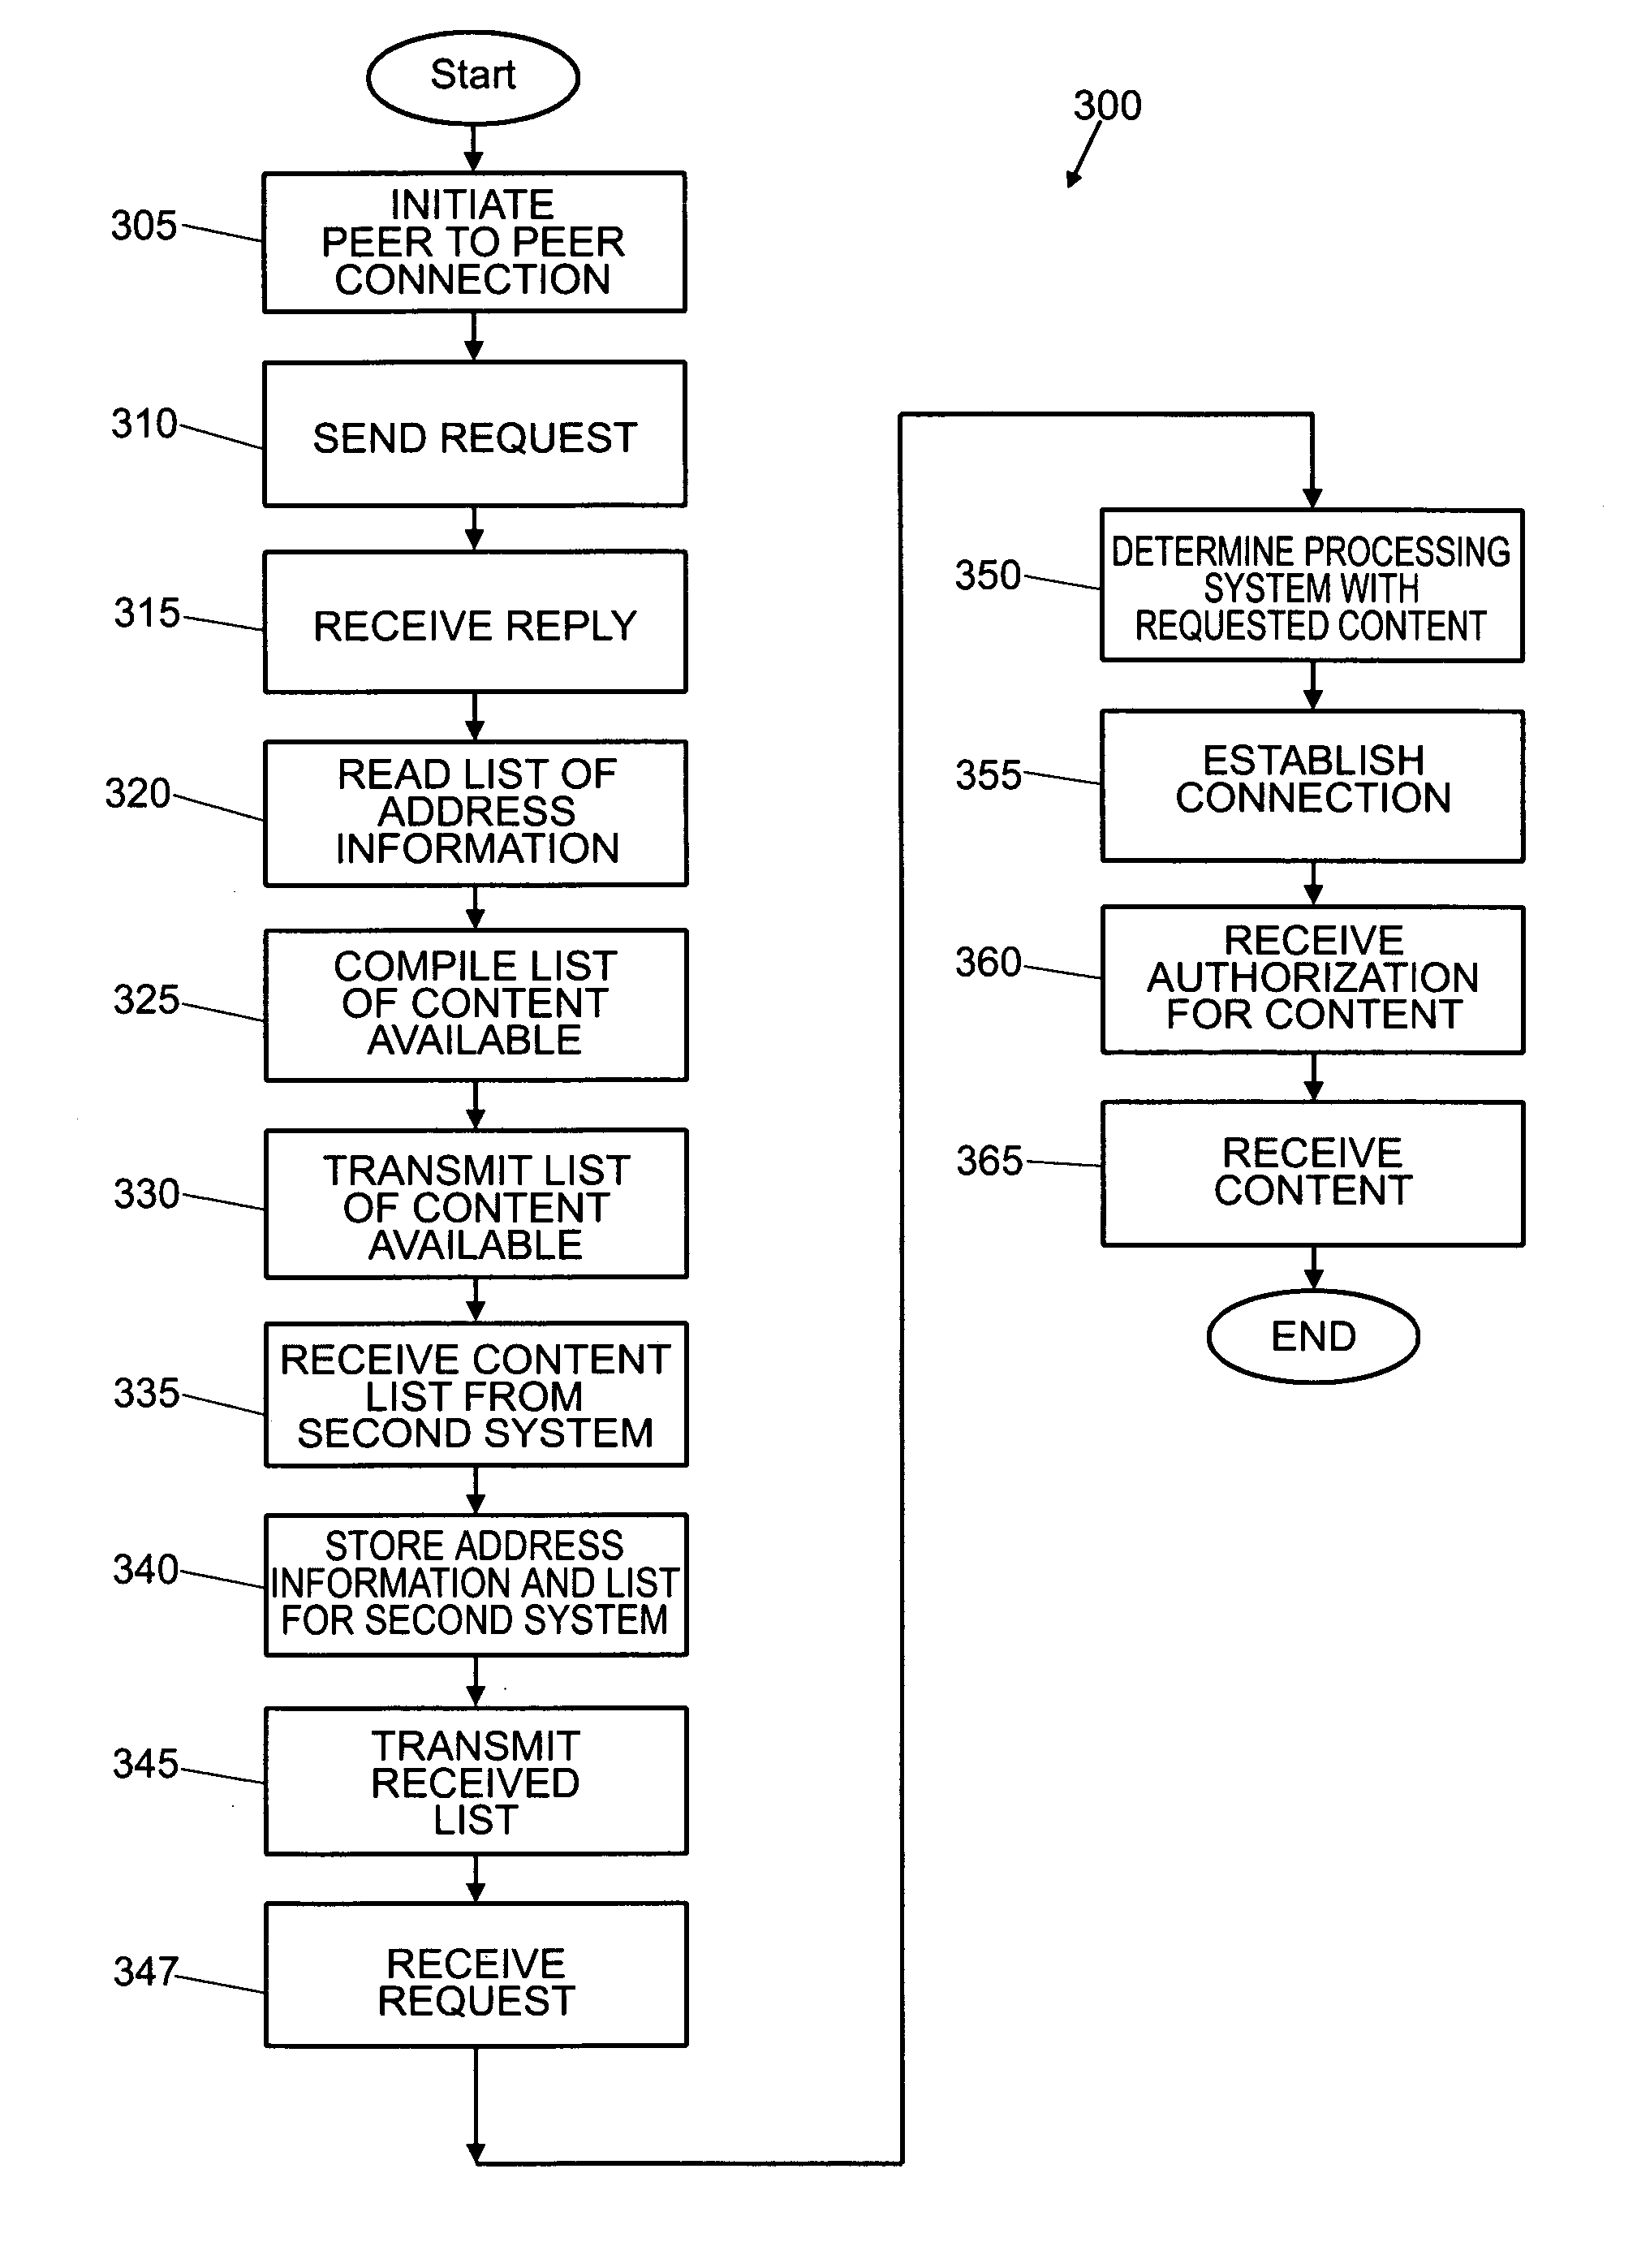 System for distributing decoy content in a peer to peer network